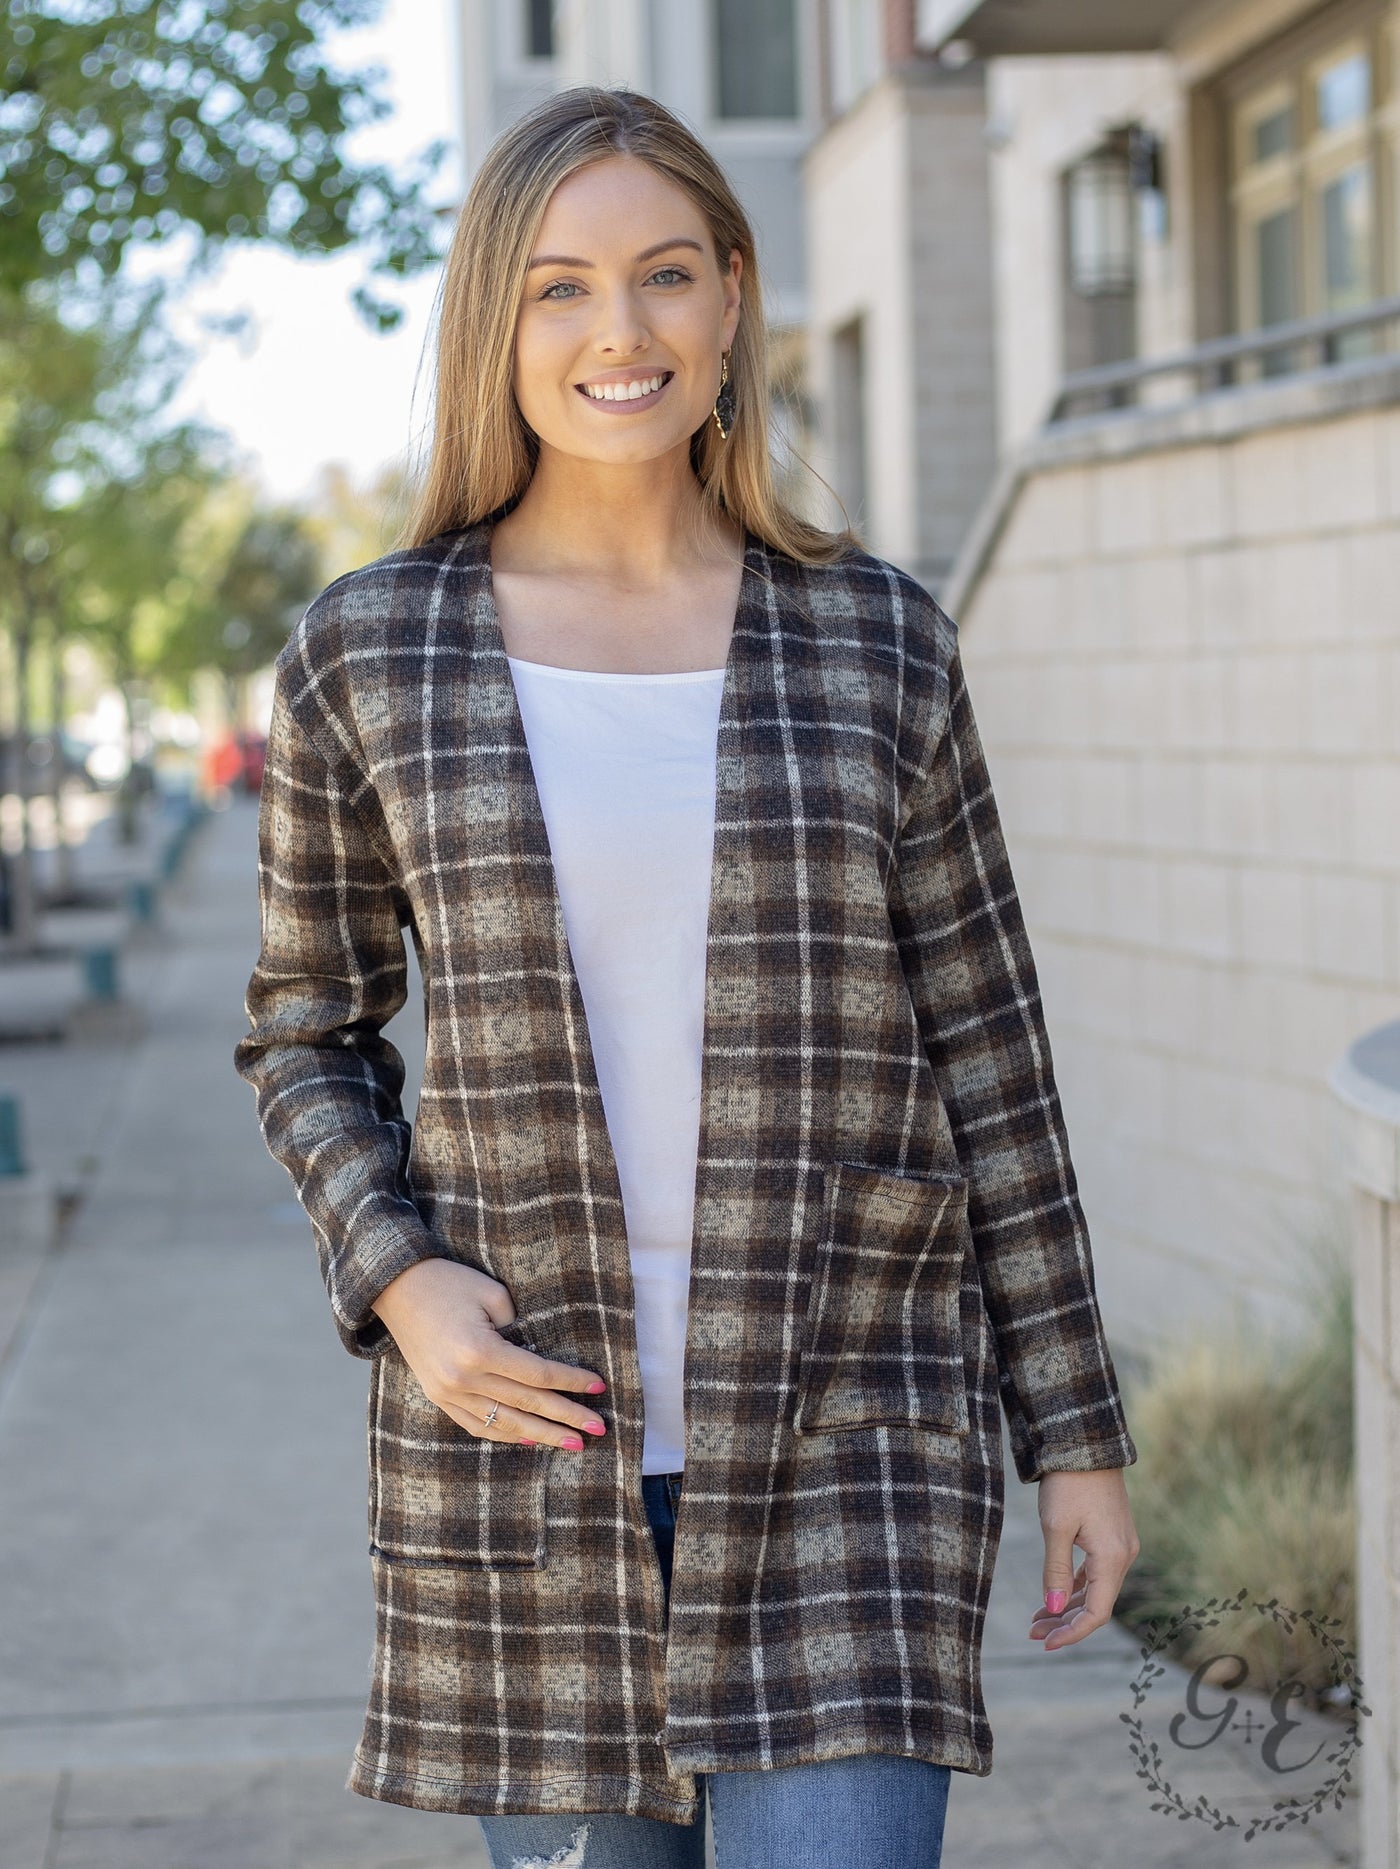 Fireplace Chillin Sweater Cardigan with Pockets, Plaid